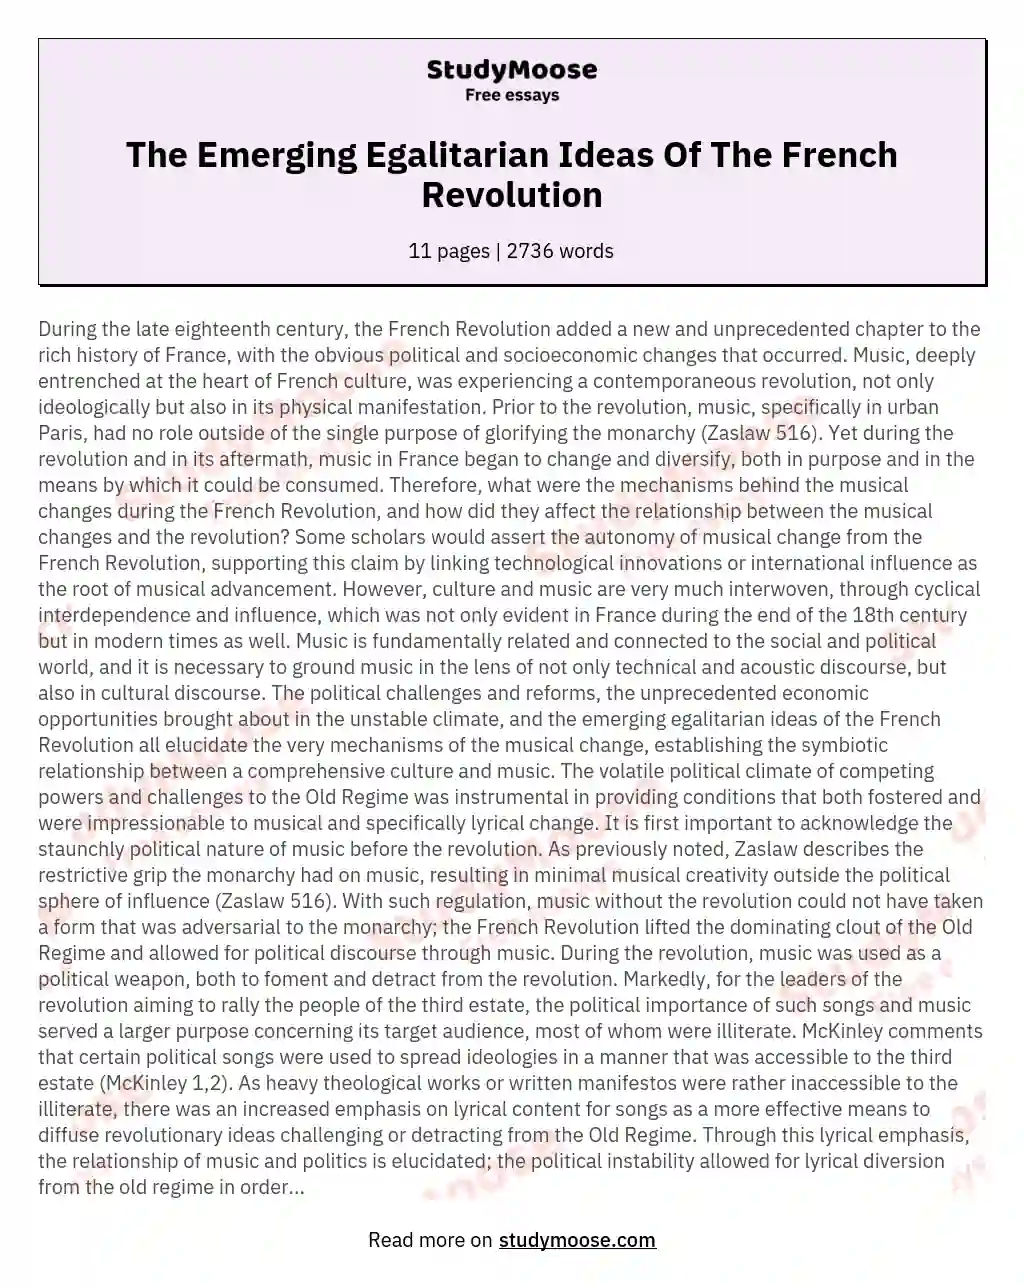 The Emerging Egalitarian Ideas Of The French Revolution essay